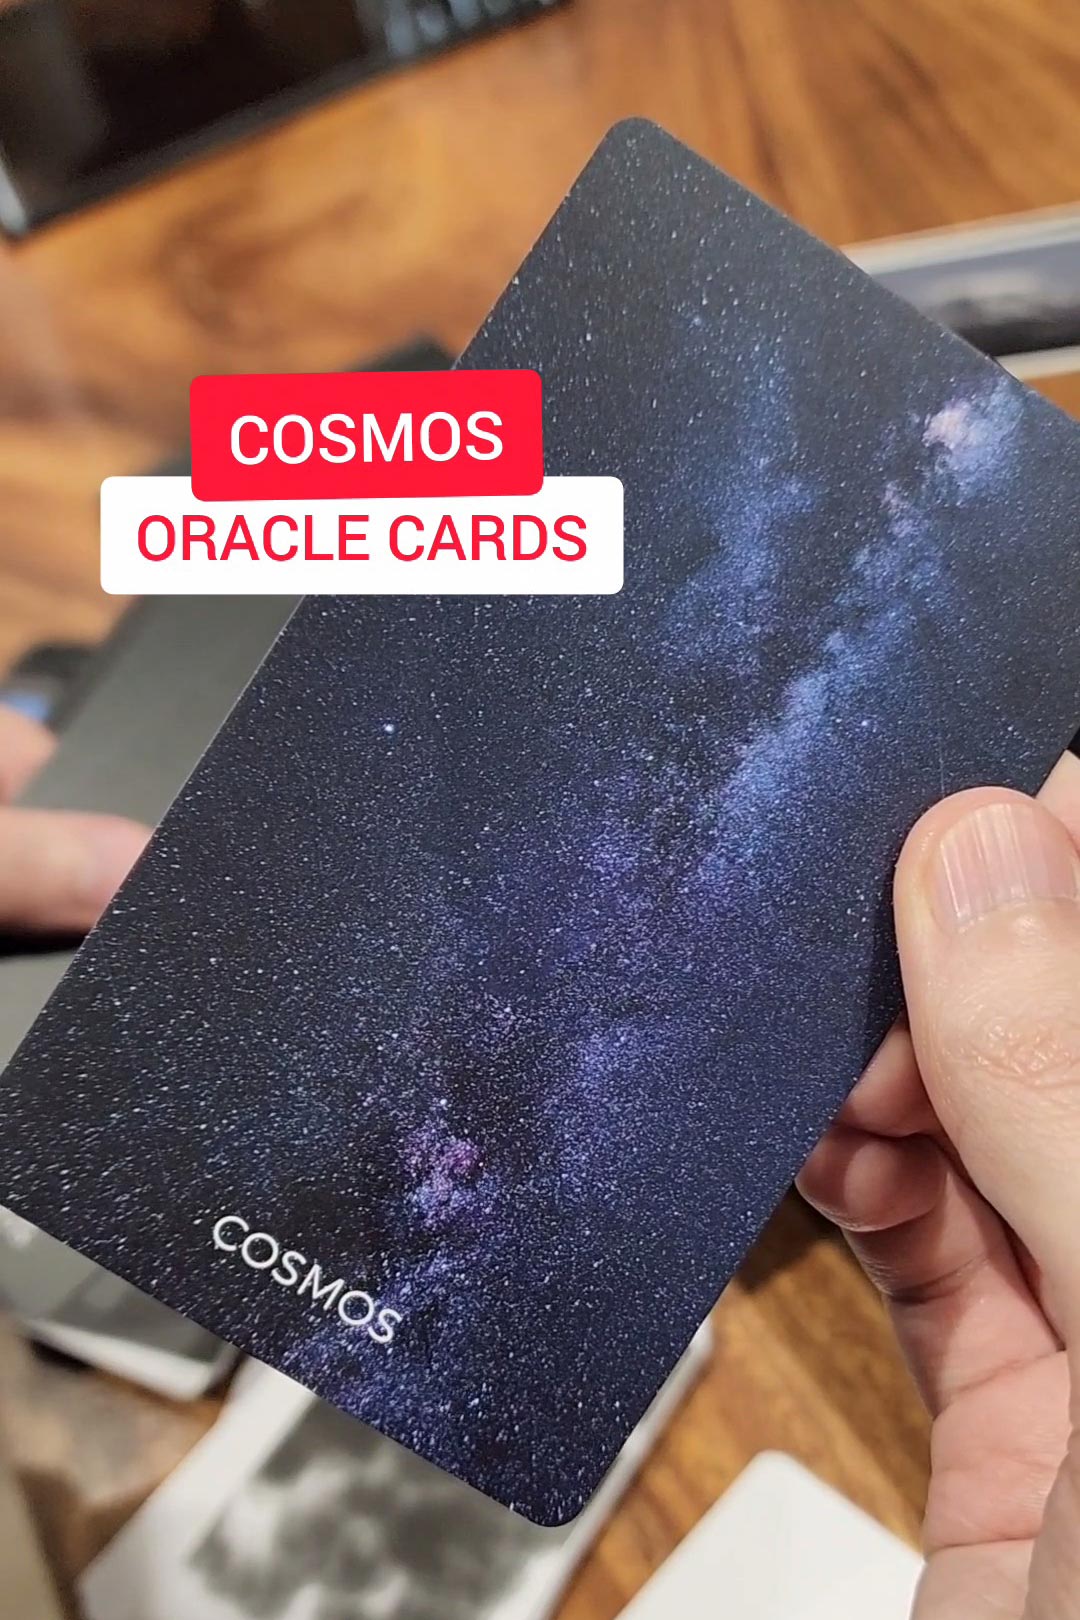 The Cosmos Oracle Set